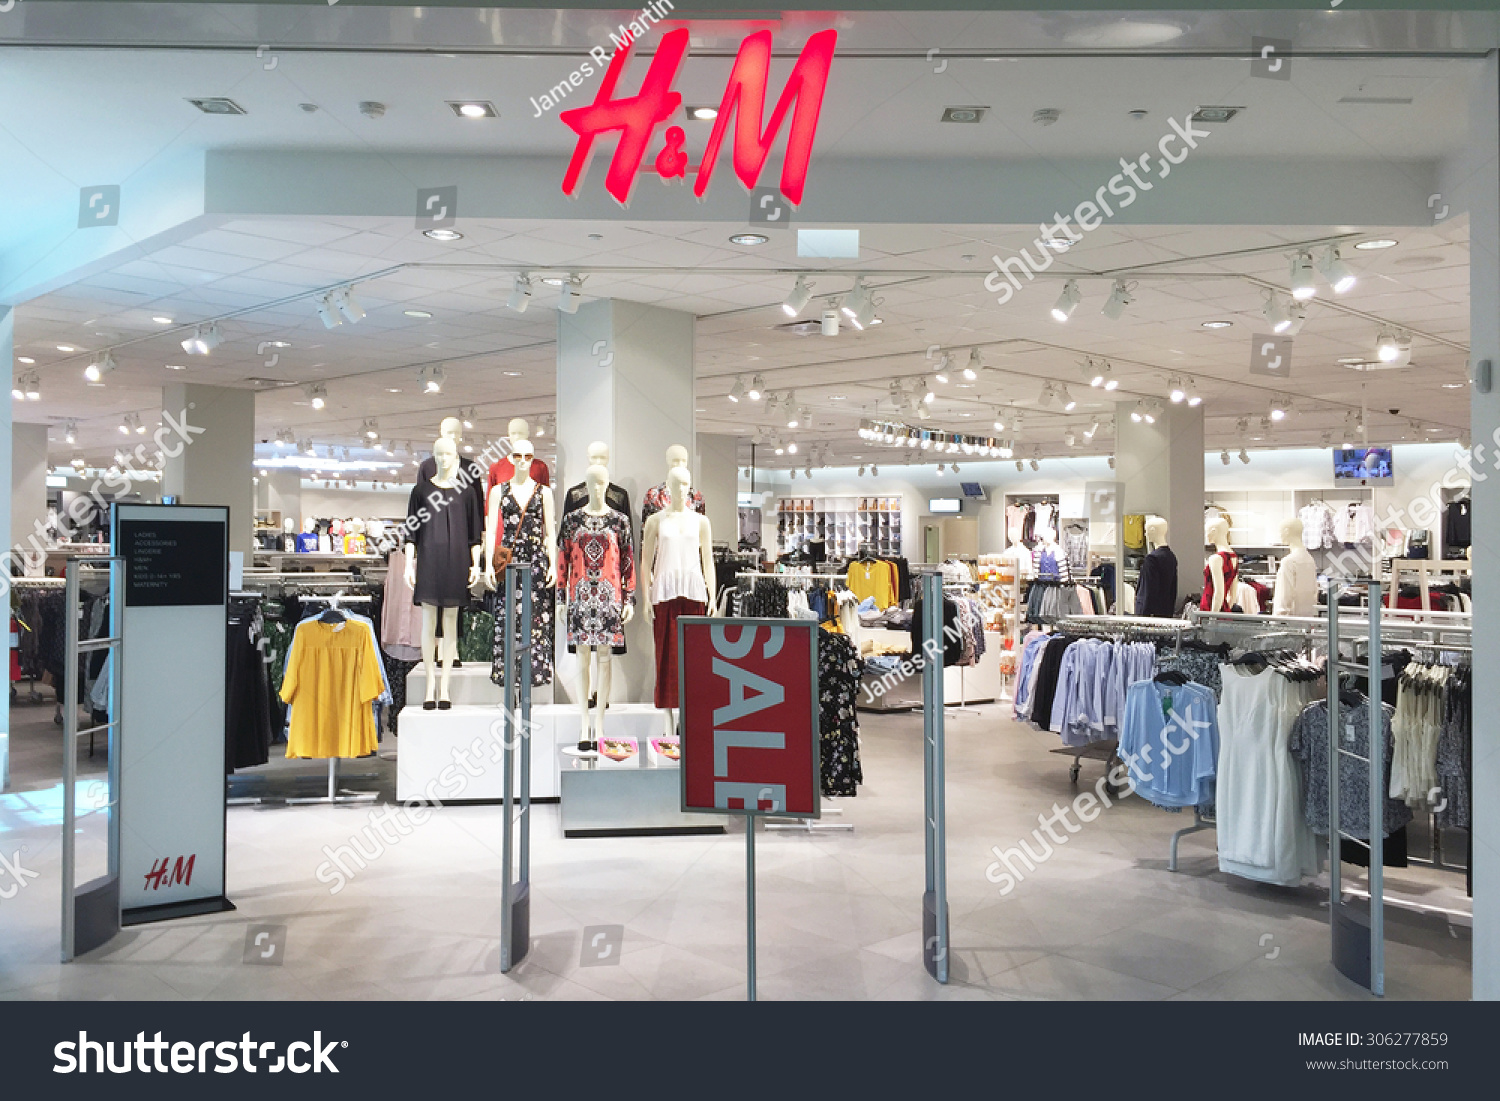 Nashville, Tn-August, 2015: Entrance To An H&M Clothing Store. H&M Has ...